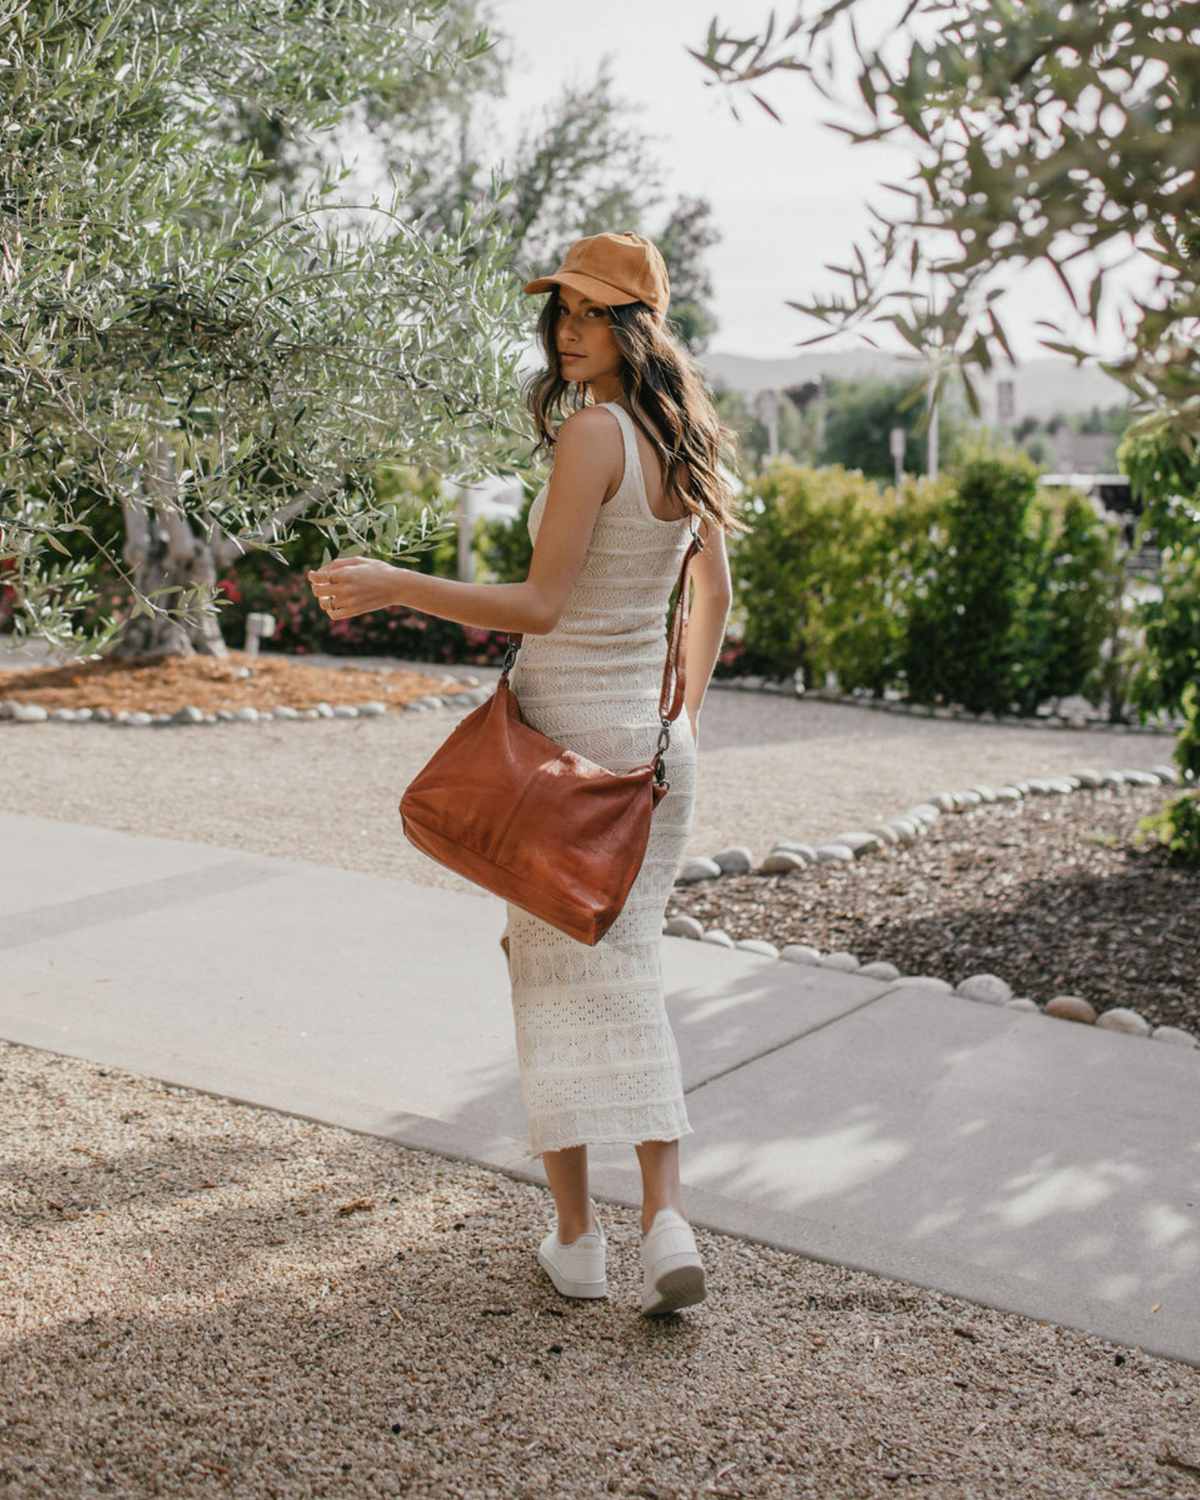 White midi dress, brown purse, and brown cap from Roux Collective Boutique.